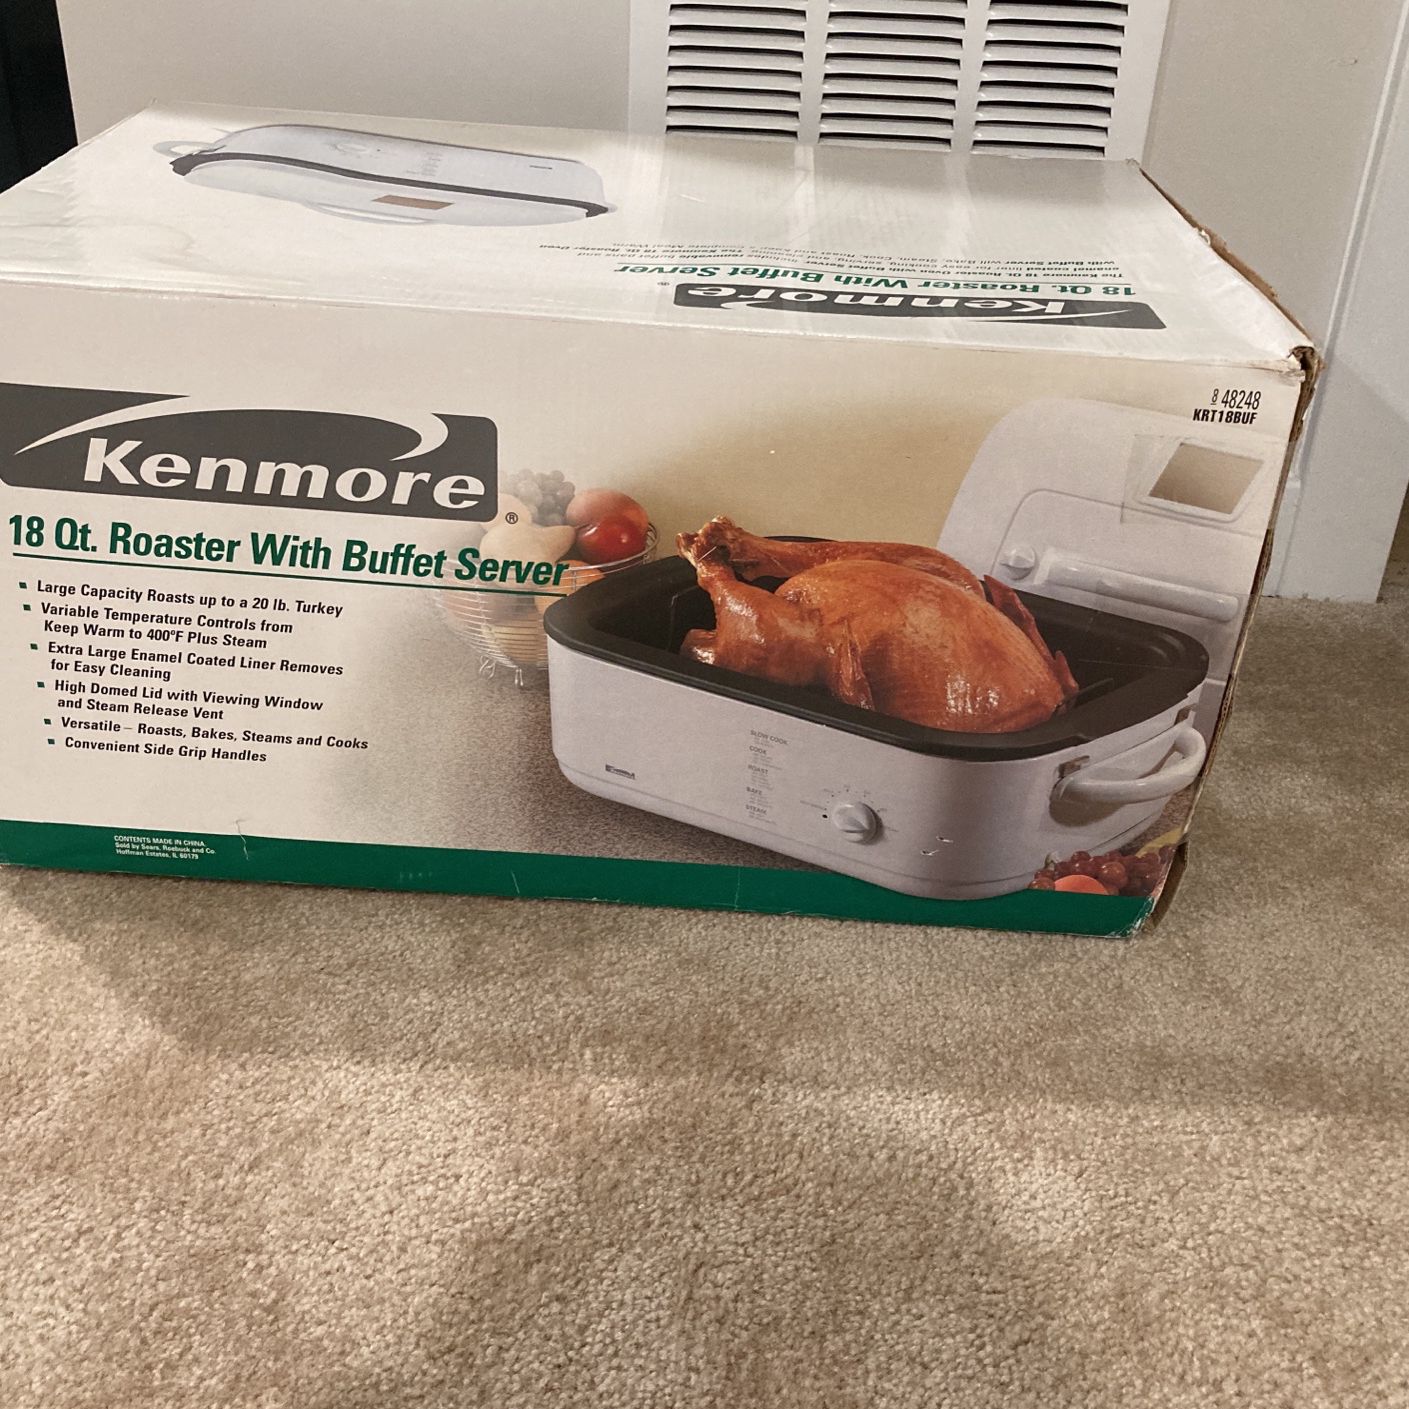 Kenmore 18 Qt Roaster With Buffet Server